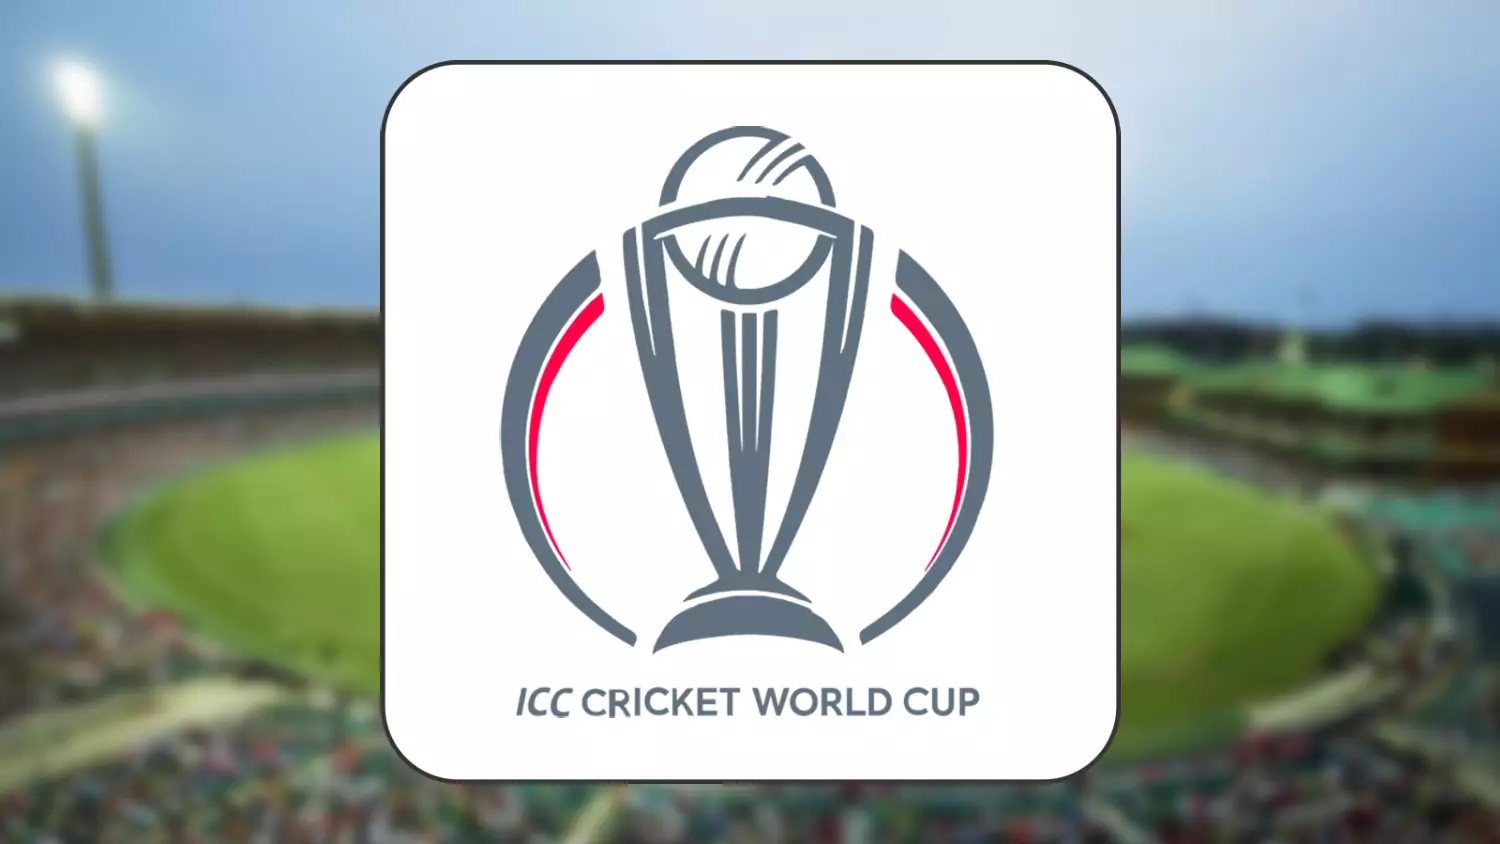 The winner of the ICC Cricket World Cup is considered a champion for the next four years.